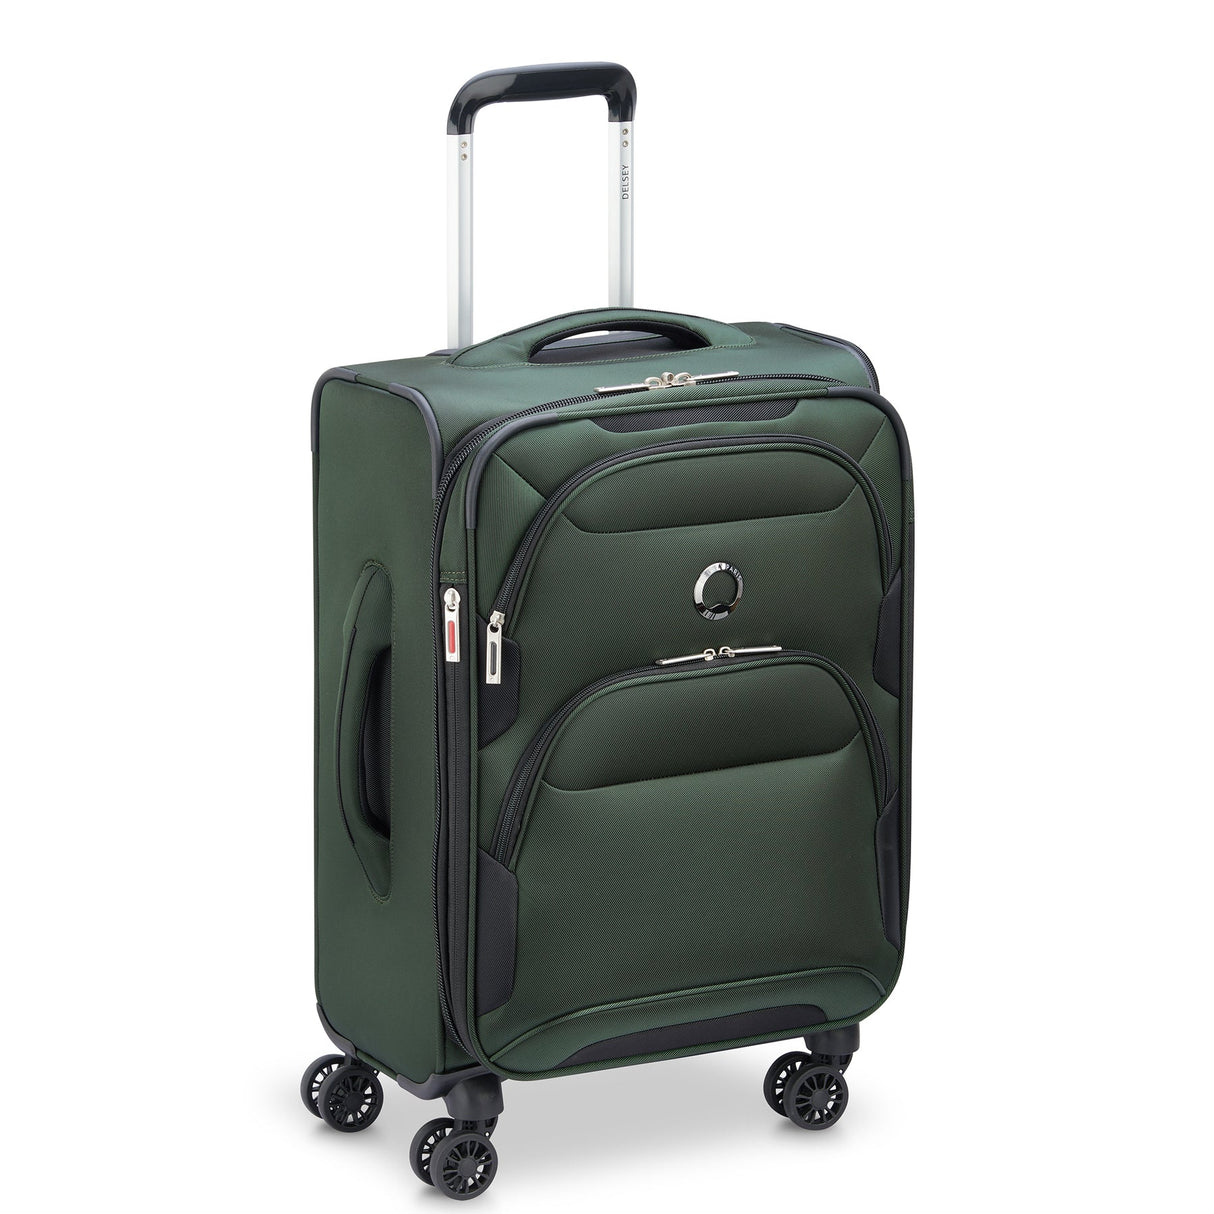 Delsey Sky Max 2.0 Carry-On Expandable Spinner , , delsey-sky-max-2.0-40328480503-02_1800x1800_7adab24e-4481-4ad0-983f-49236f3dadd9